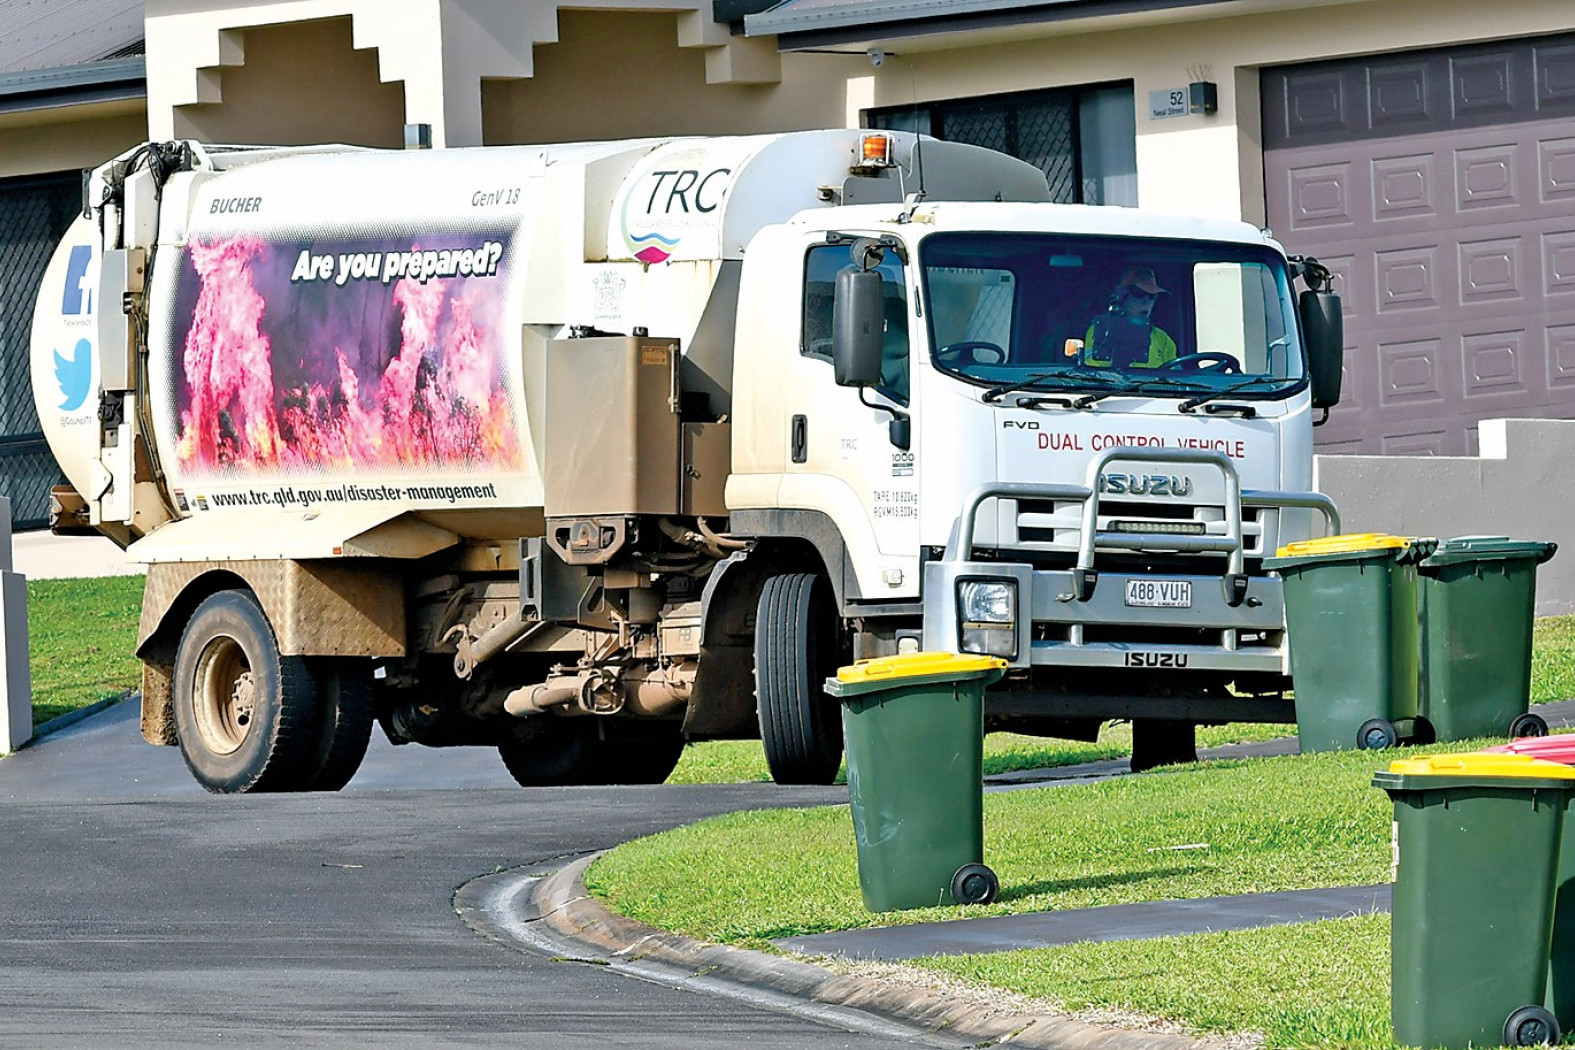 TRC will sell off its fleet of waste trucks when a contractor takes over the kerbside collection service in November.